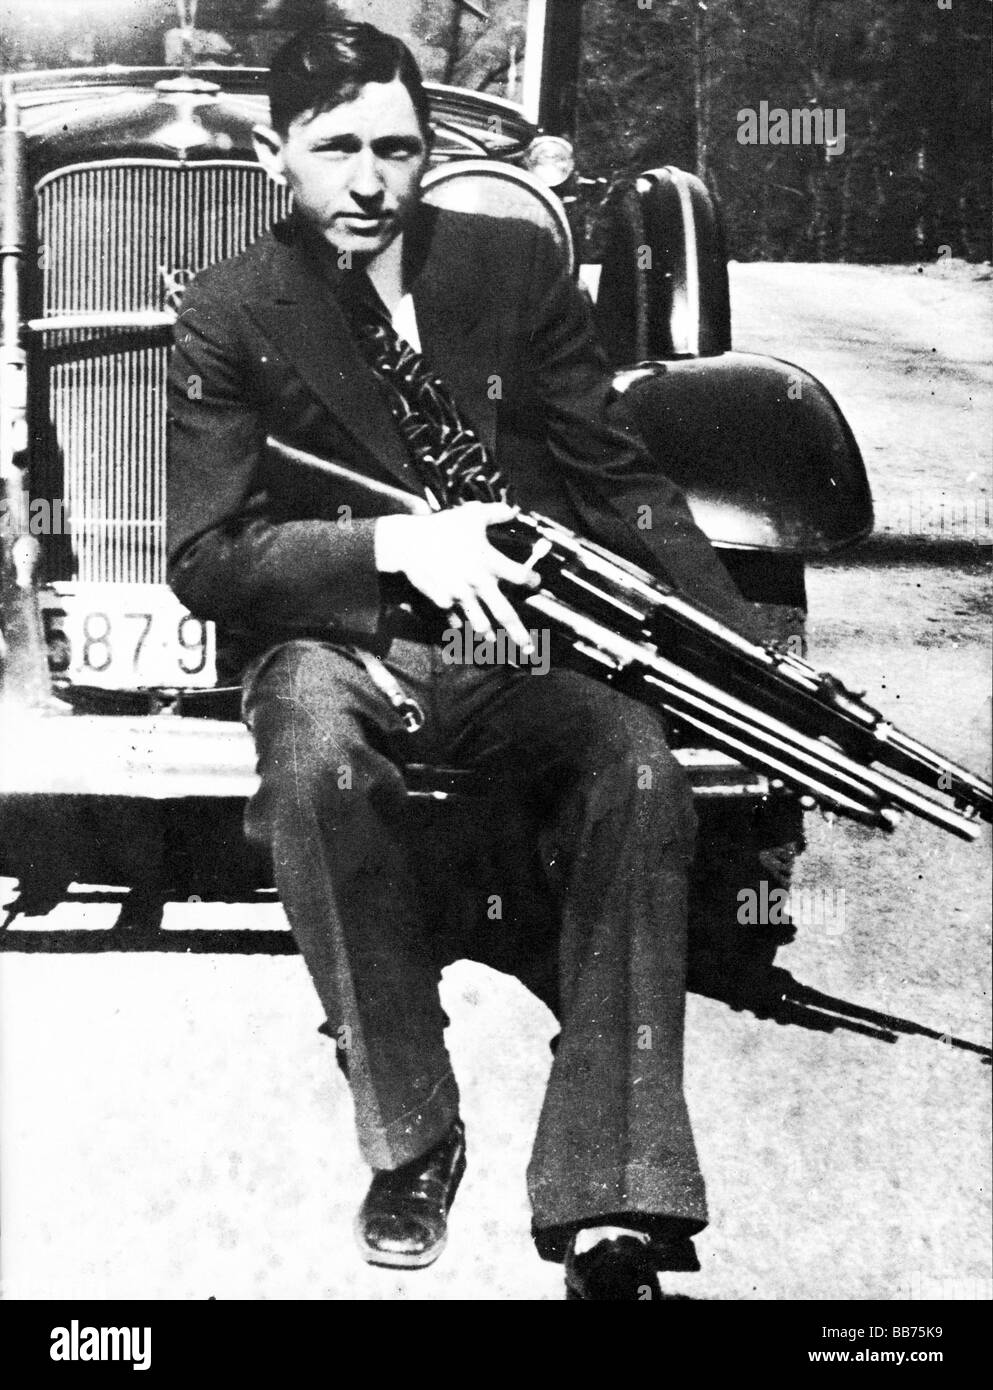 Clyde Barrow Photo Of The Infamous Outlaw And His Car Taken By Bonnie Parker While They